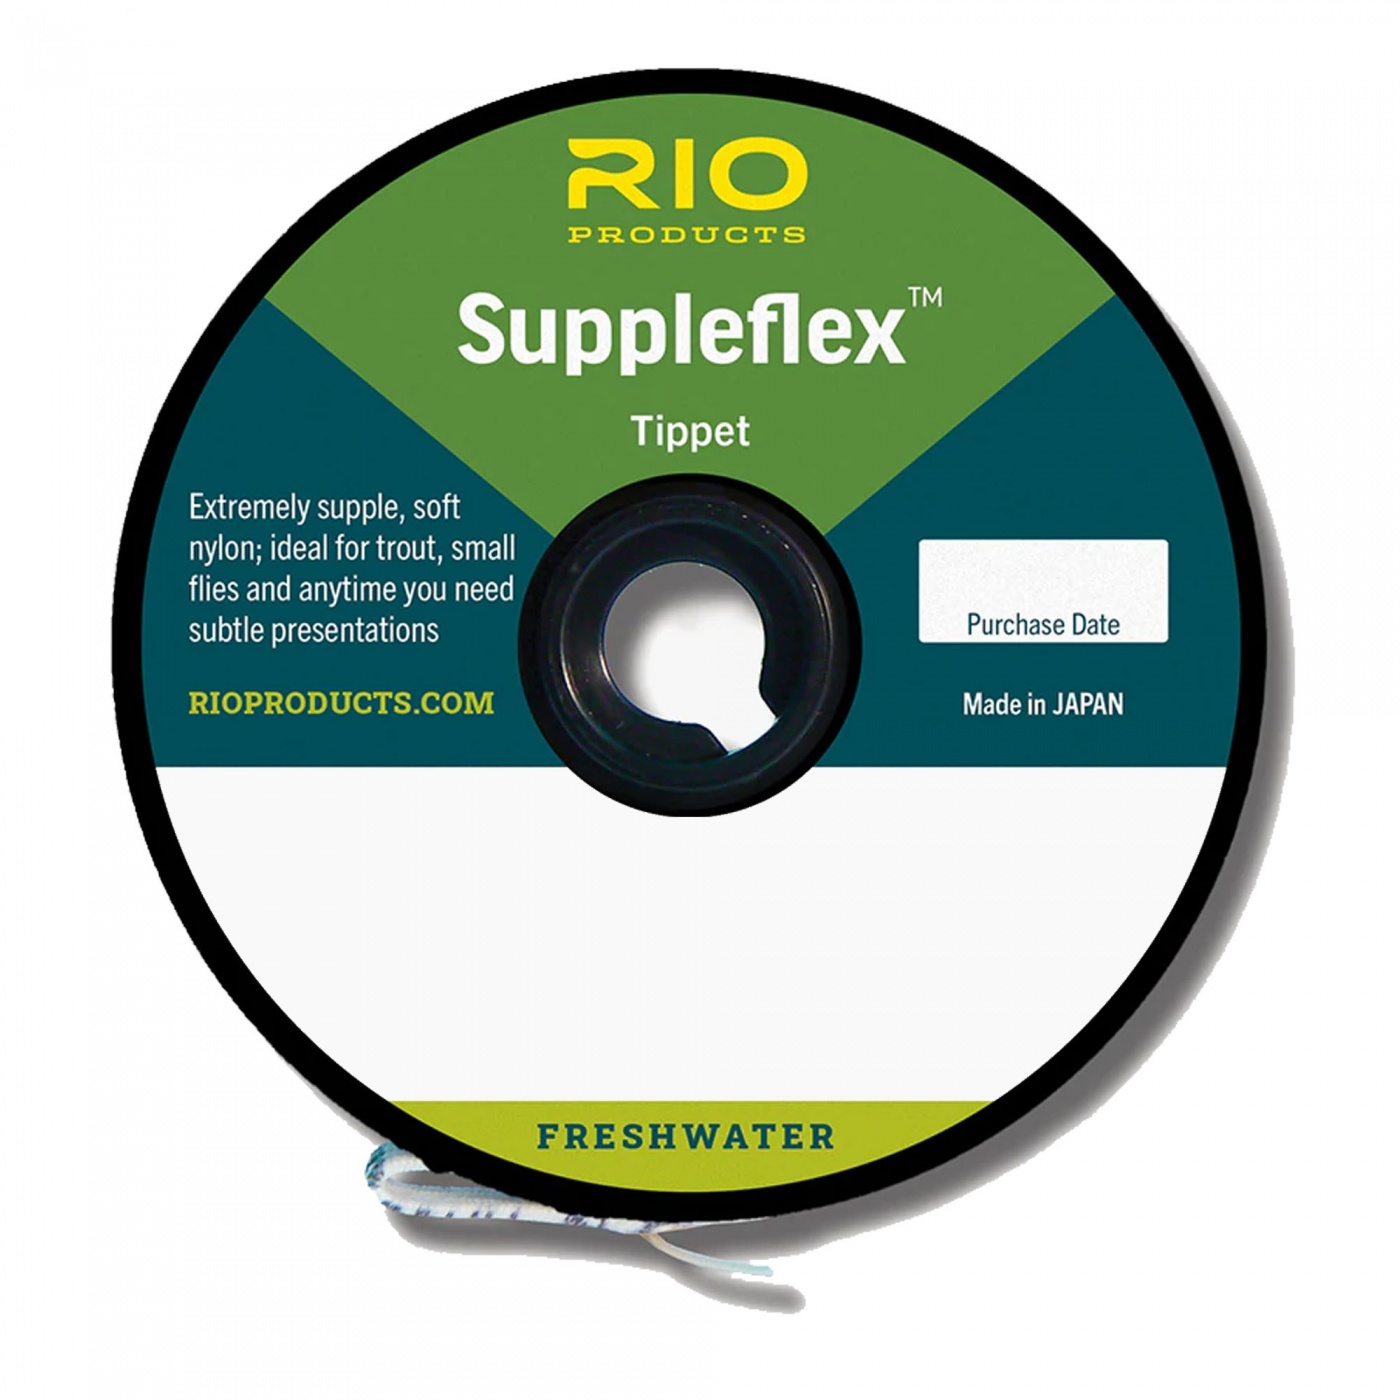 Rio Products Suppleflex Tippet 5X 4.7lb / 2.1kg For Fly Fishing